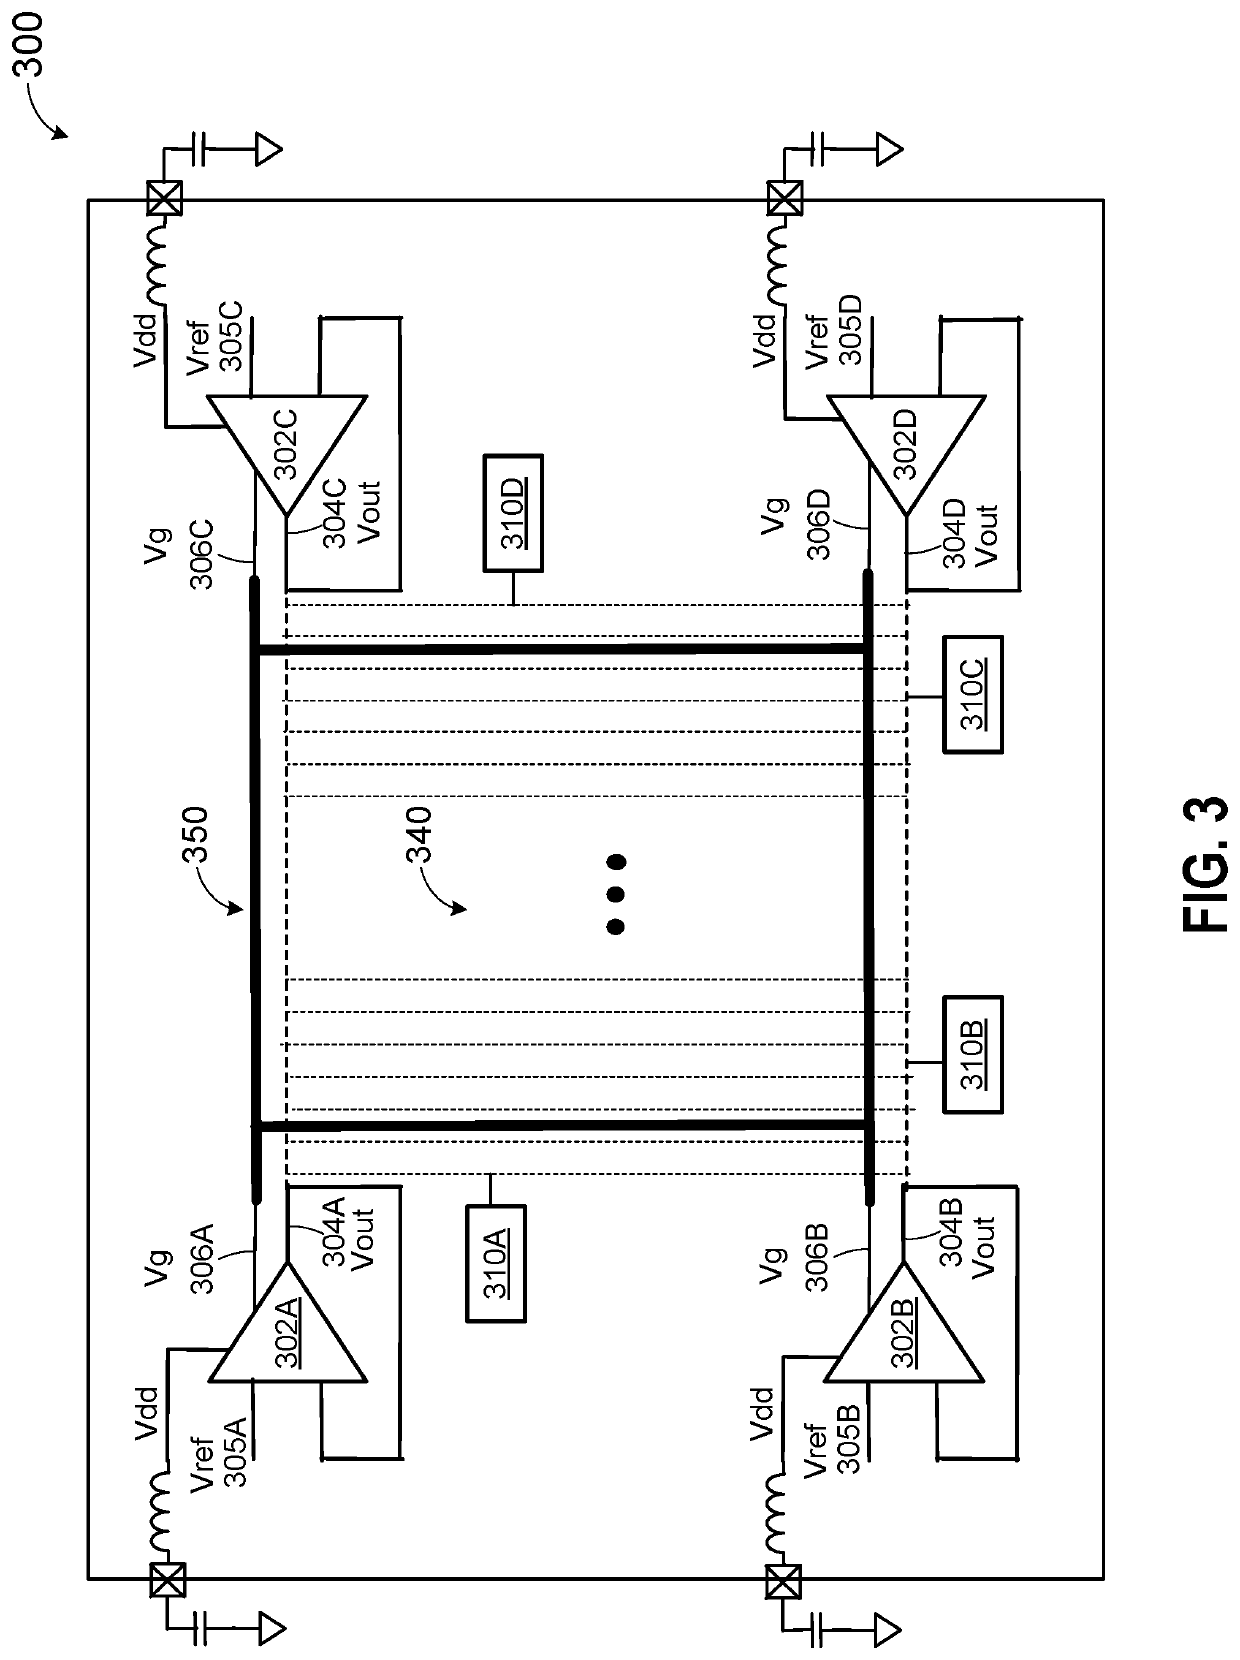 Distributed low-dropout voltage regulator (LDO) with uniform power delivery